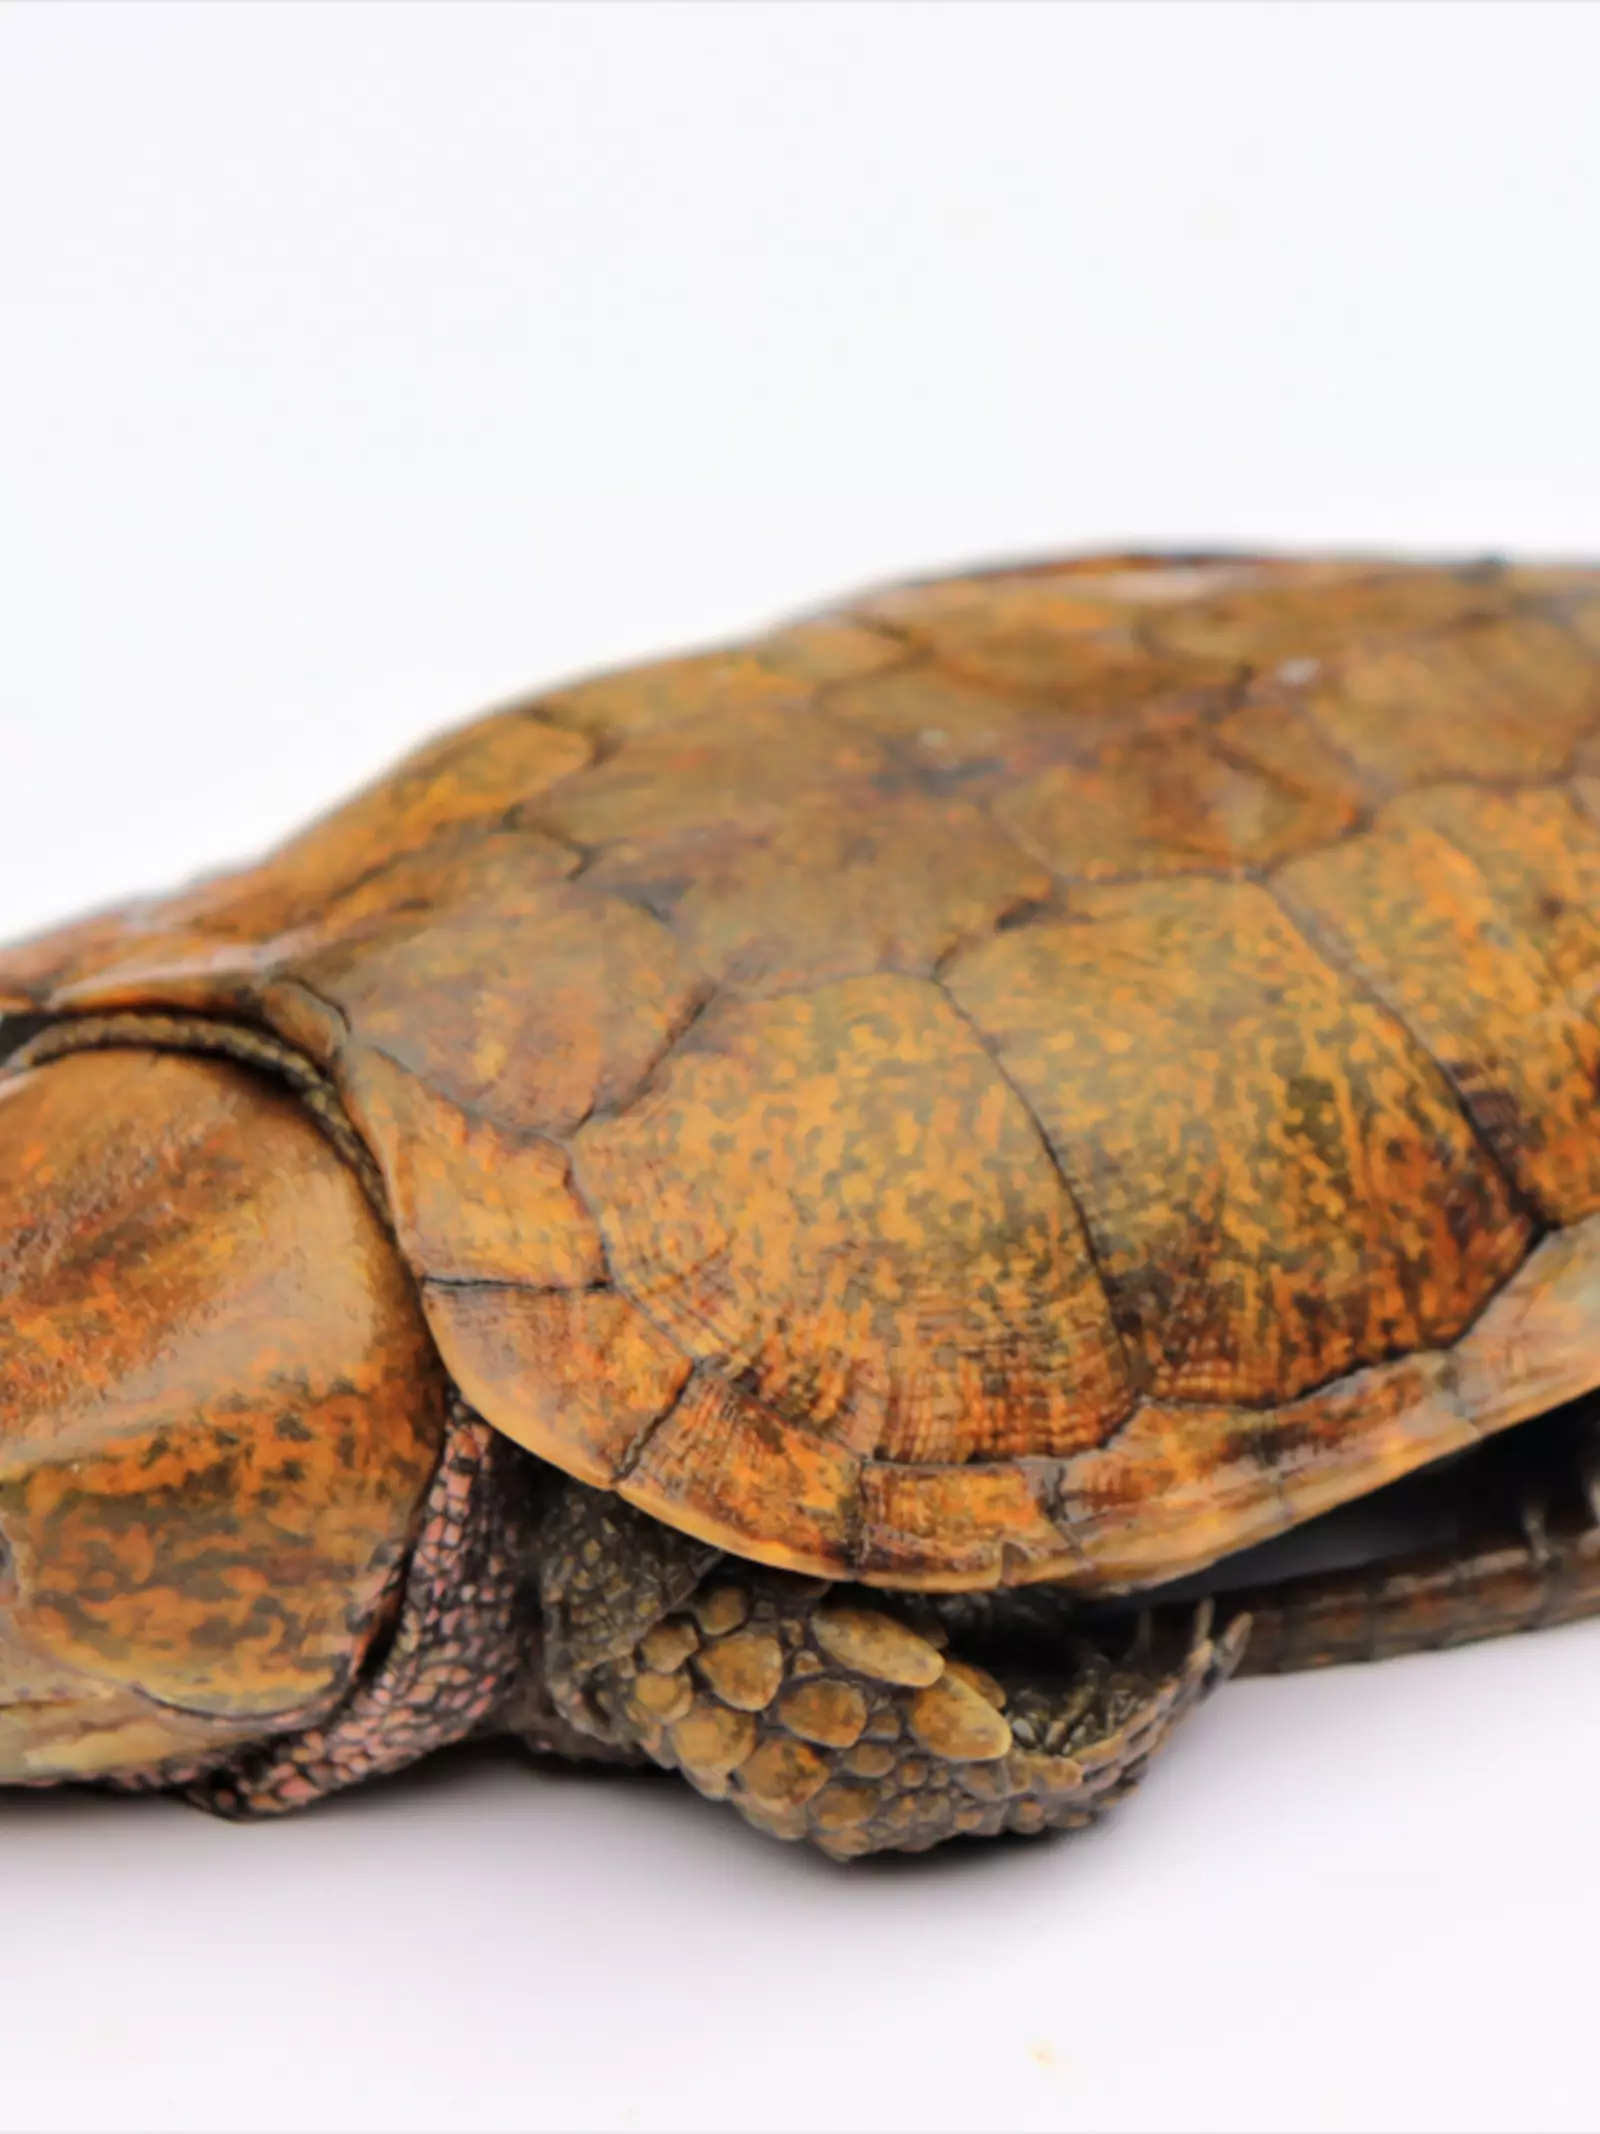 Big-headed turtle on a white table top